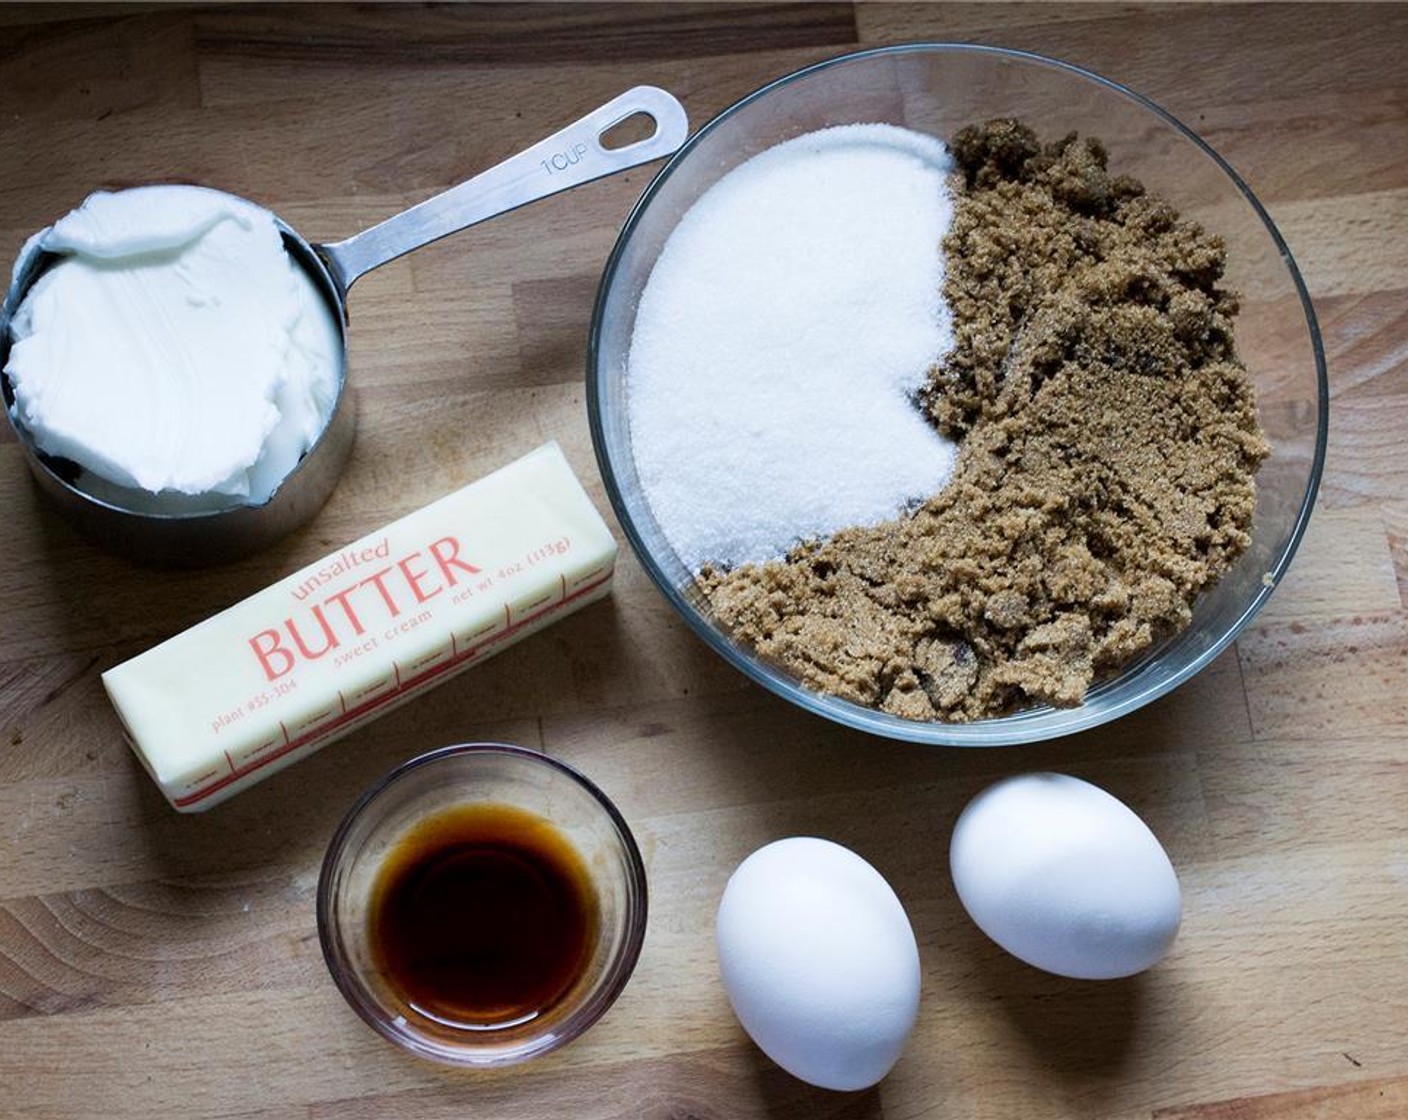 step 2 In a mixer, combine the Unsalted Butter (1 cup), Vegetable Shortening (1 cup), Brown Sugar (1 1/2 cups), Granulated Sugar (1/2 cup), Egg (1) and egg yolk, and Vanilla Extract (1 Tbsp).